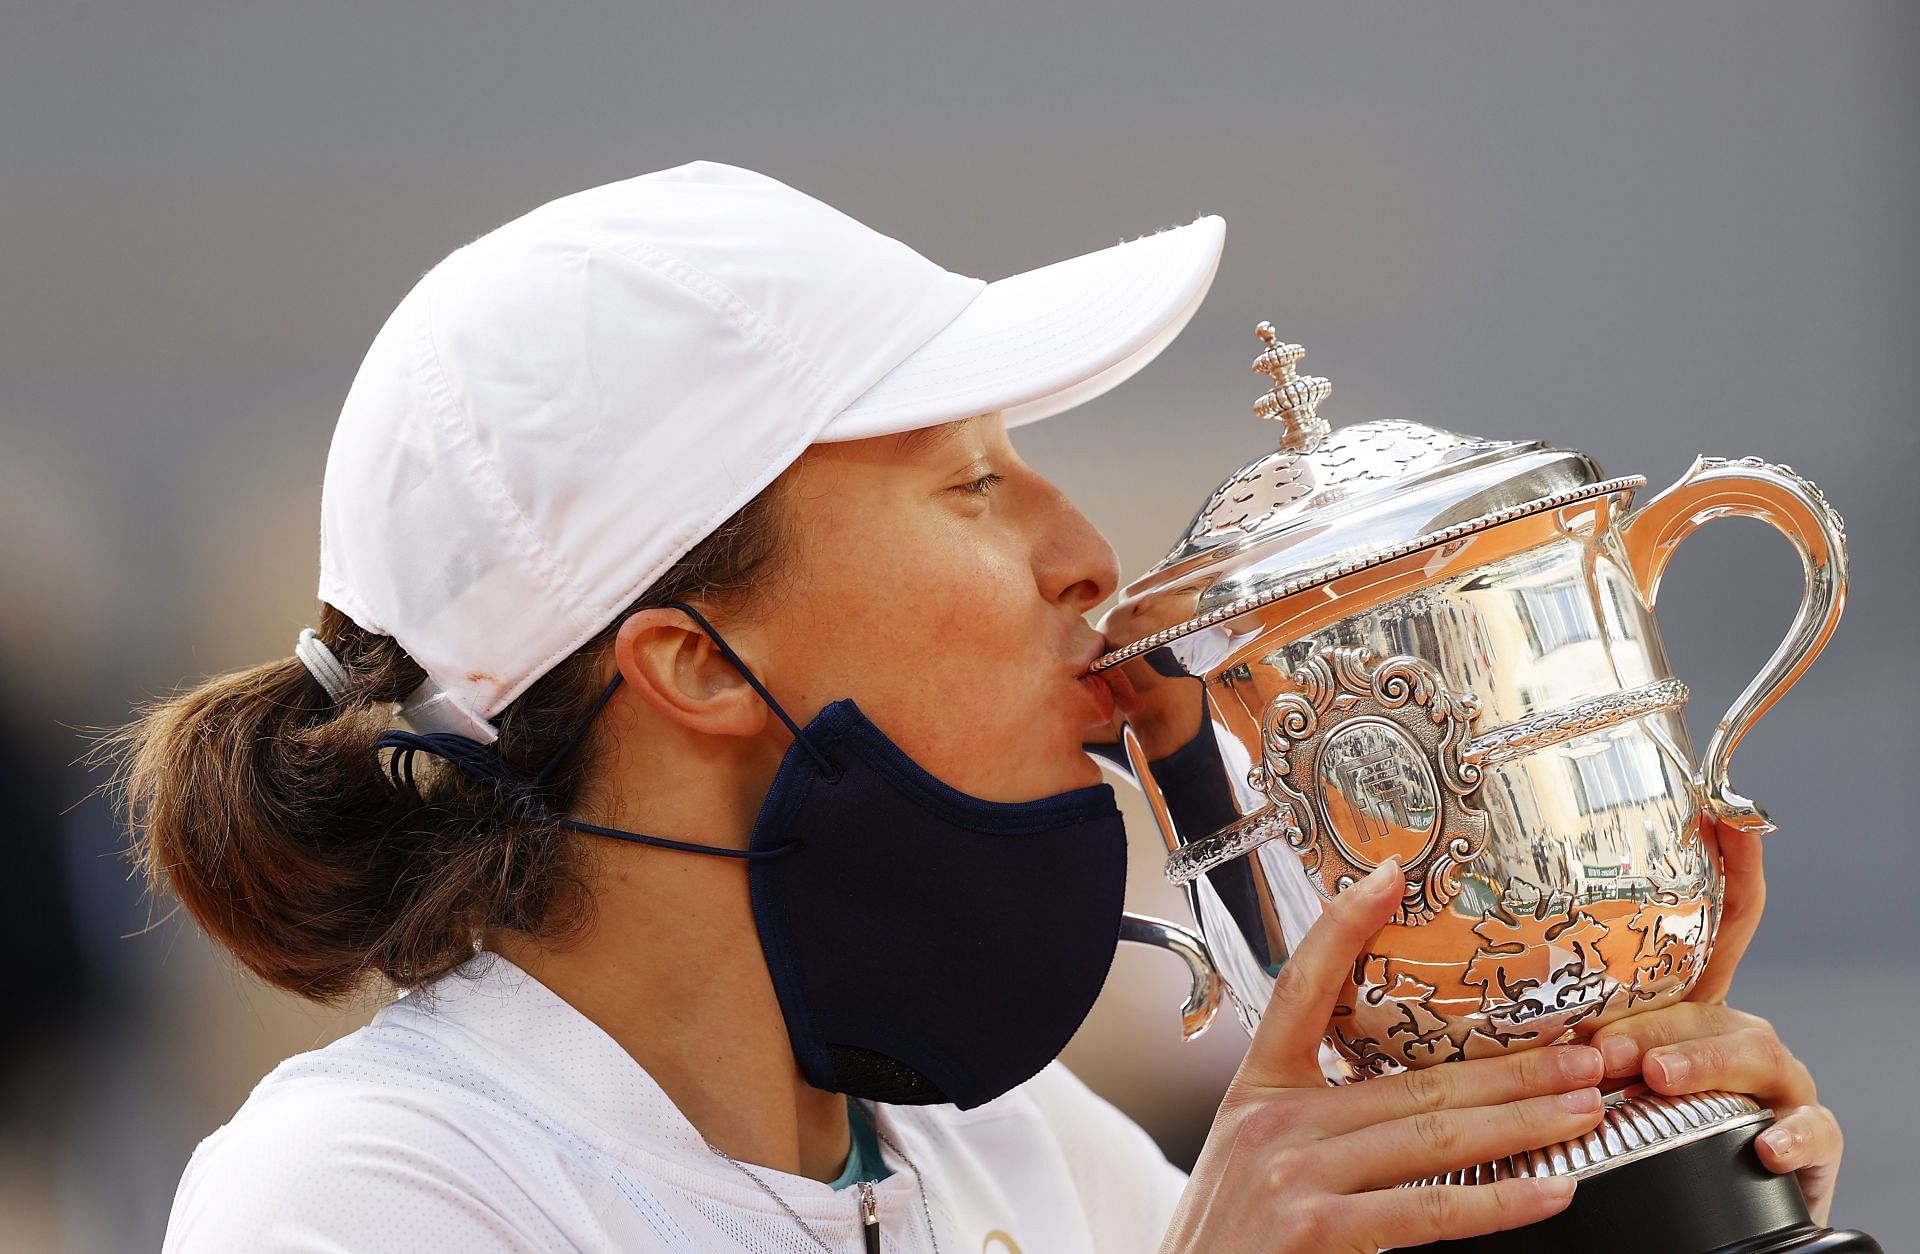 2020 French Open champion Iga Swiatek is a firm favorite for the title this year